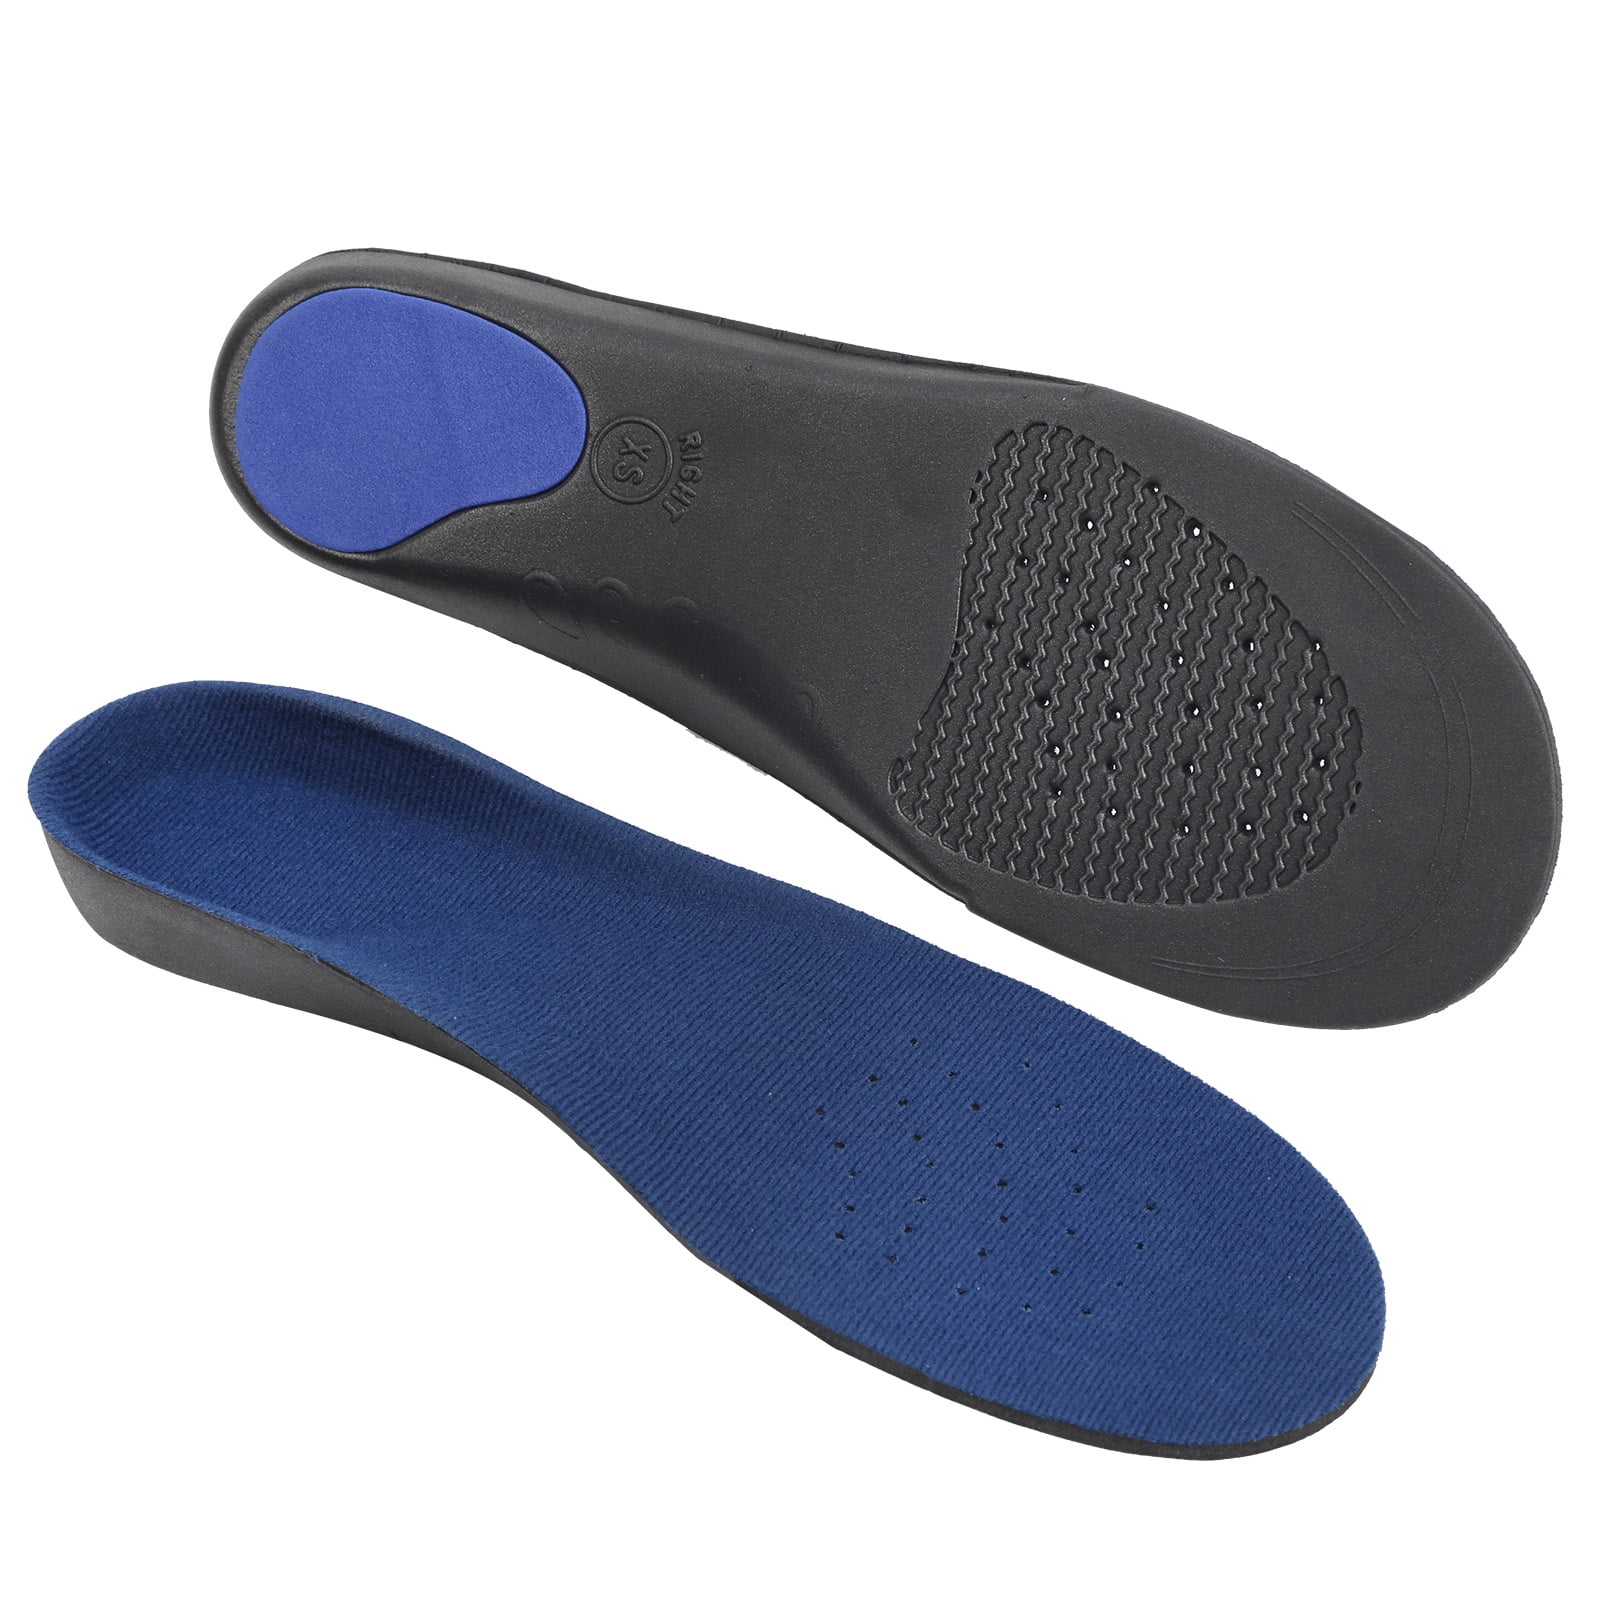 2 pair Pro11 Gel 22 orthotic insoles for high impact sports walking T Style 